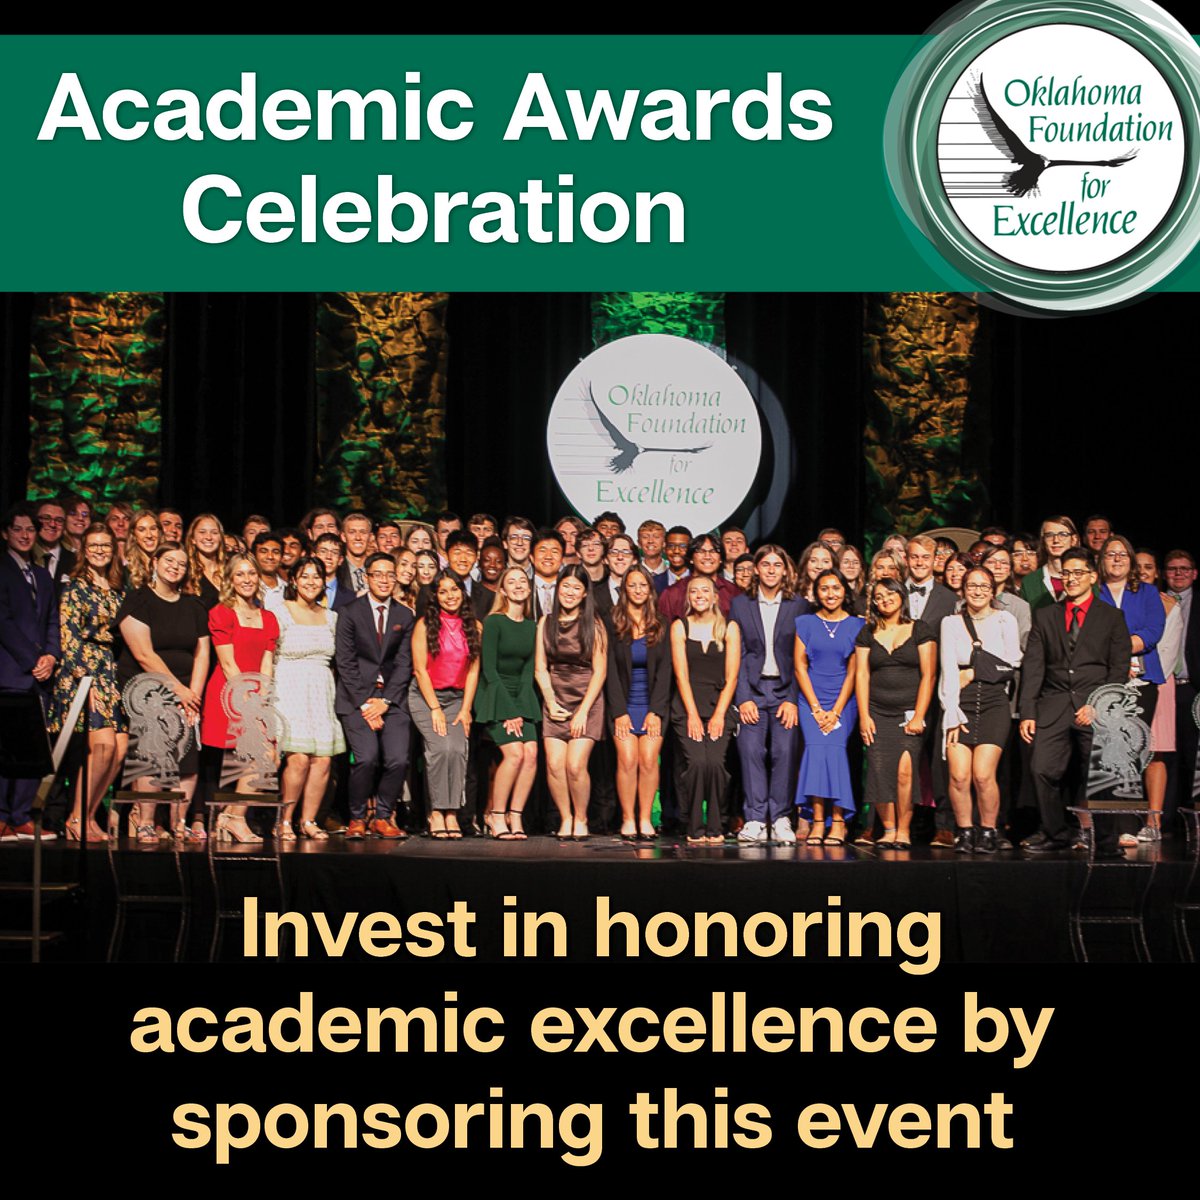 Partner with OFE to recognize and encourage academic excellence in Oklahoma’s public schools by investing in an Academic Awards Celebration sponsorship. Learn more at ofe.org/academic-award… #oklaed #ofeawards